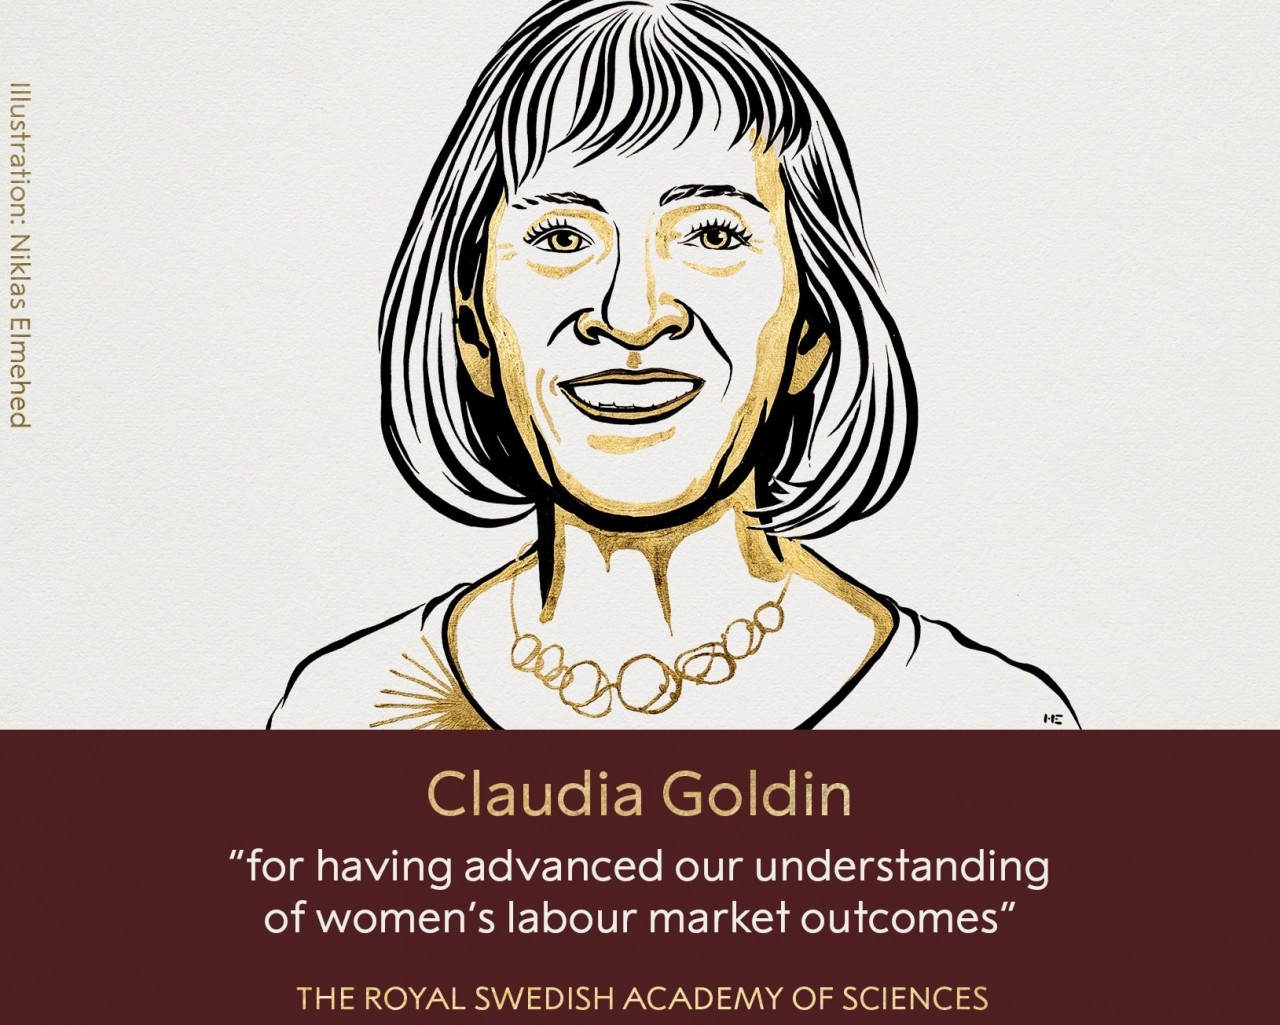 Who is Claudia Goldin - Third Woman Awarded Nobel Economics Prize for Research on Workplace Gender Gap?